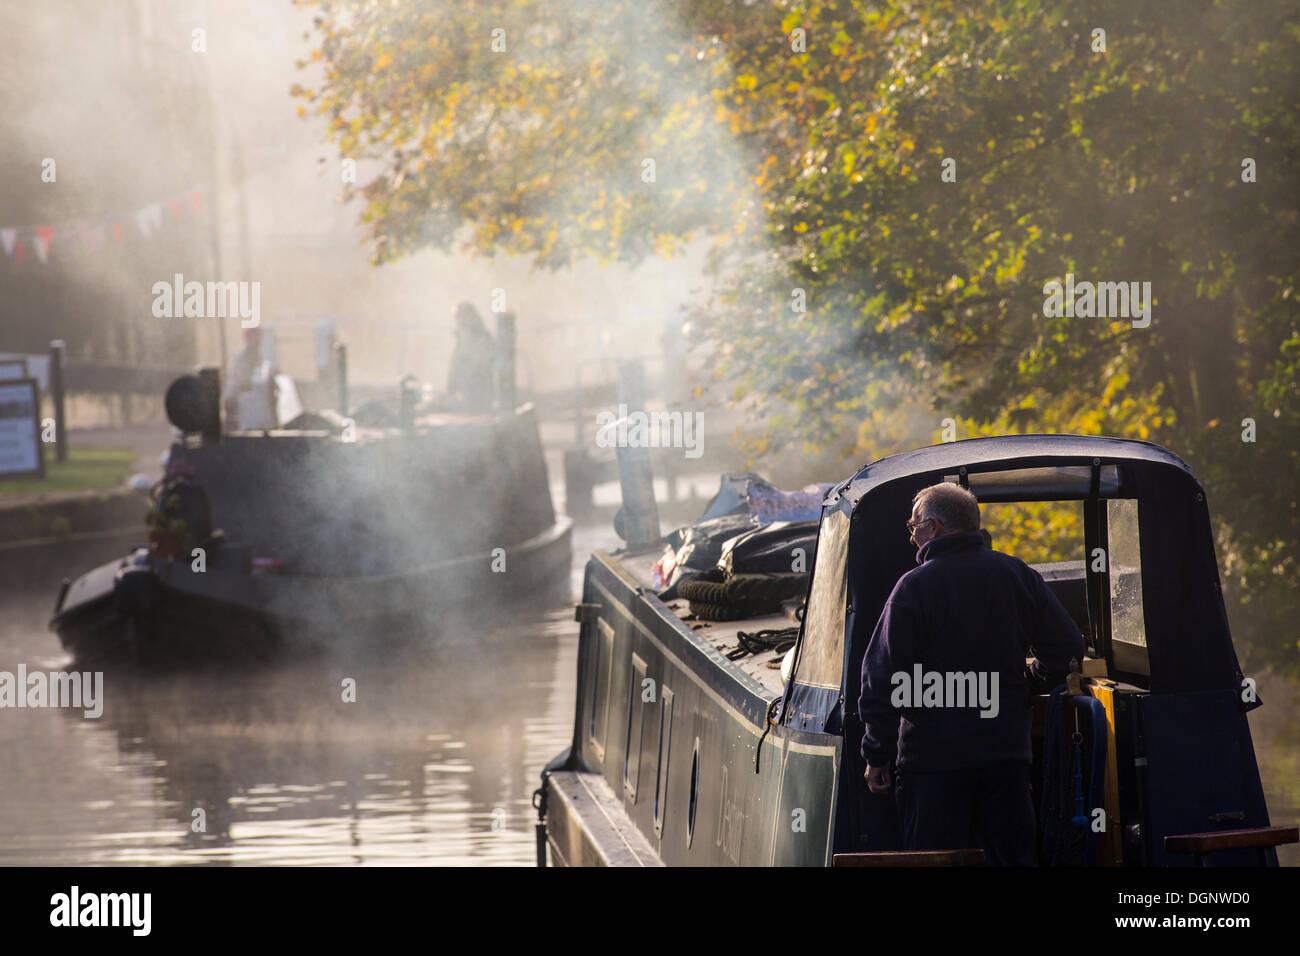 Berkhamsted, Hertfordshire, UK. 24th Oct, 2013. Smoke from canal boats mixes with mist on a crisp Autumn morning, at a lock outside the Rising Sun pub on the Grand Union Canal in Berkhamsted, Hertfordshire, UK. Photo Credit: David Levenson/Alamy Live News Stock Photo